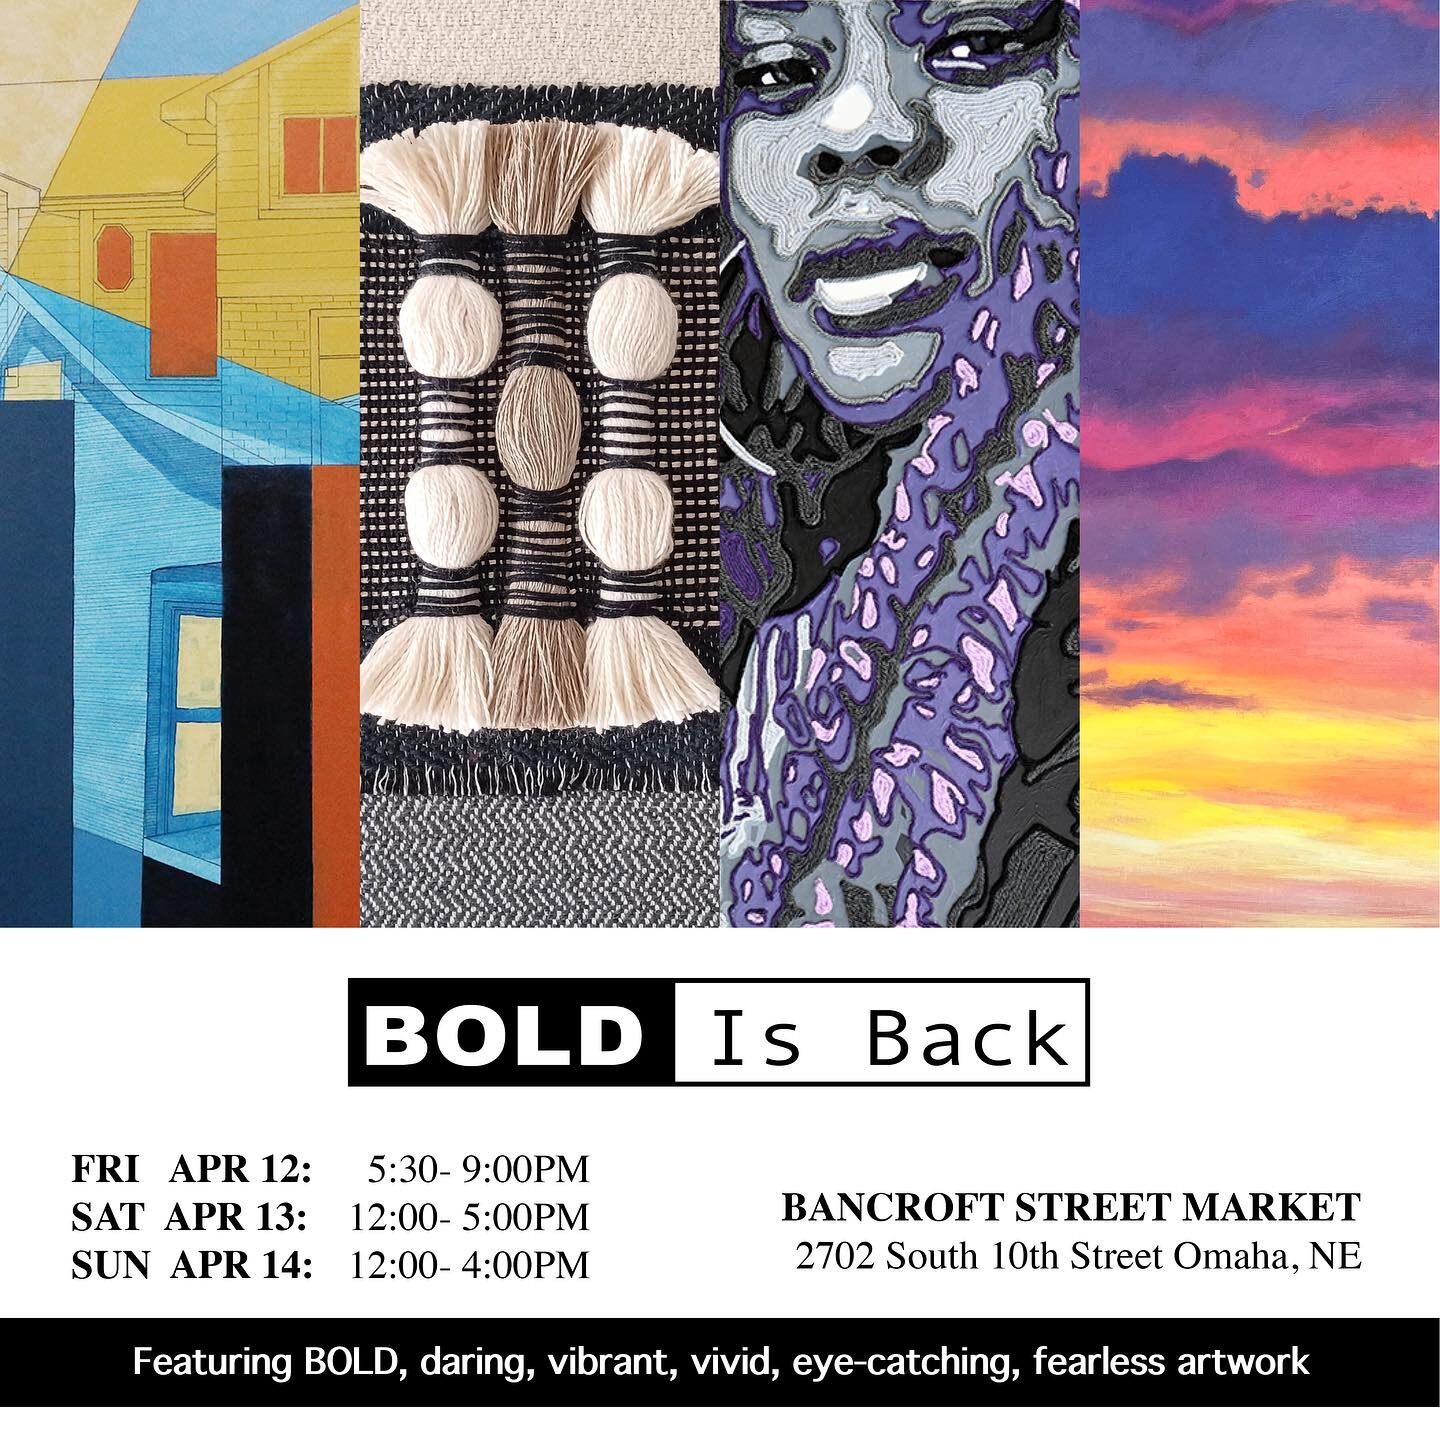 So excited to have a painting in this show again this year!  My painting, &ldquo;Orange Tree in Brown Pot&rdquo; is part of the show. &ldquo;Bold is Back&rdquo; is at the Bancroft Street Market this year, so many incredible artists participating.  Ap